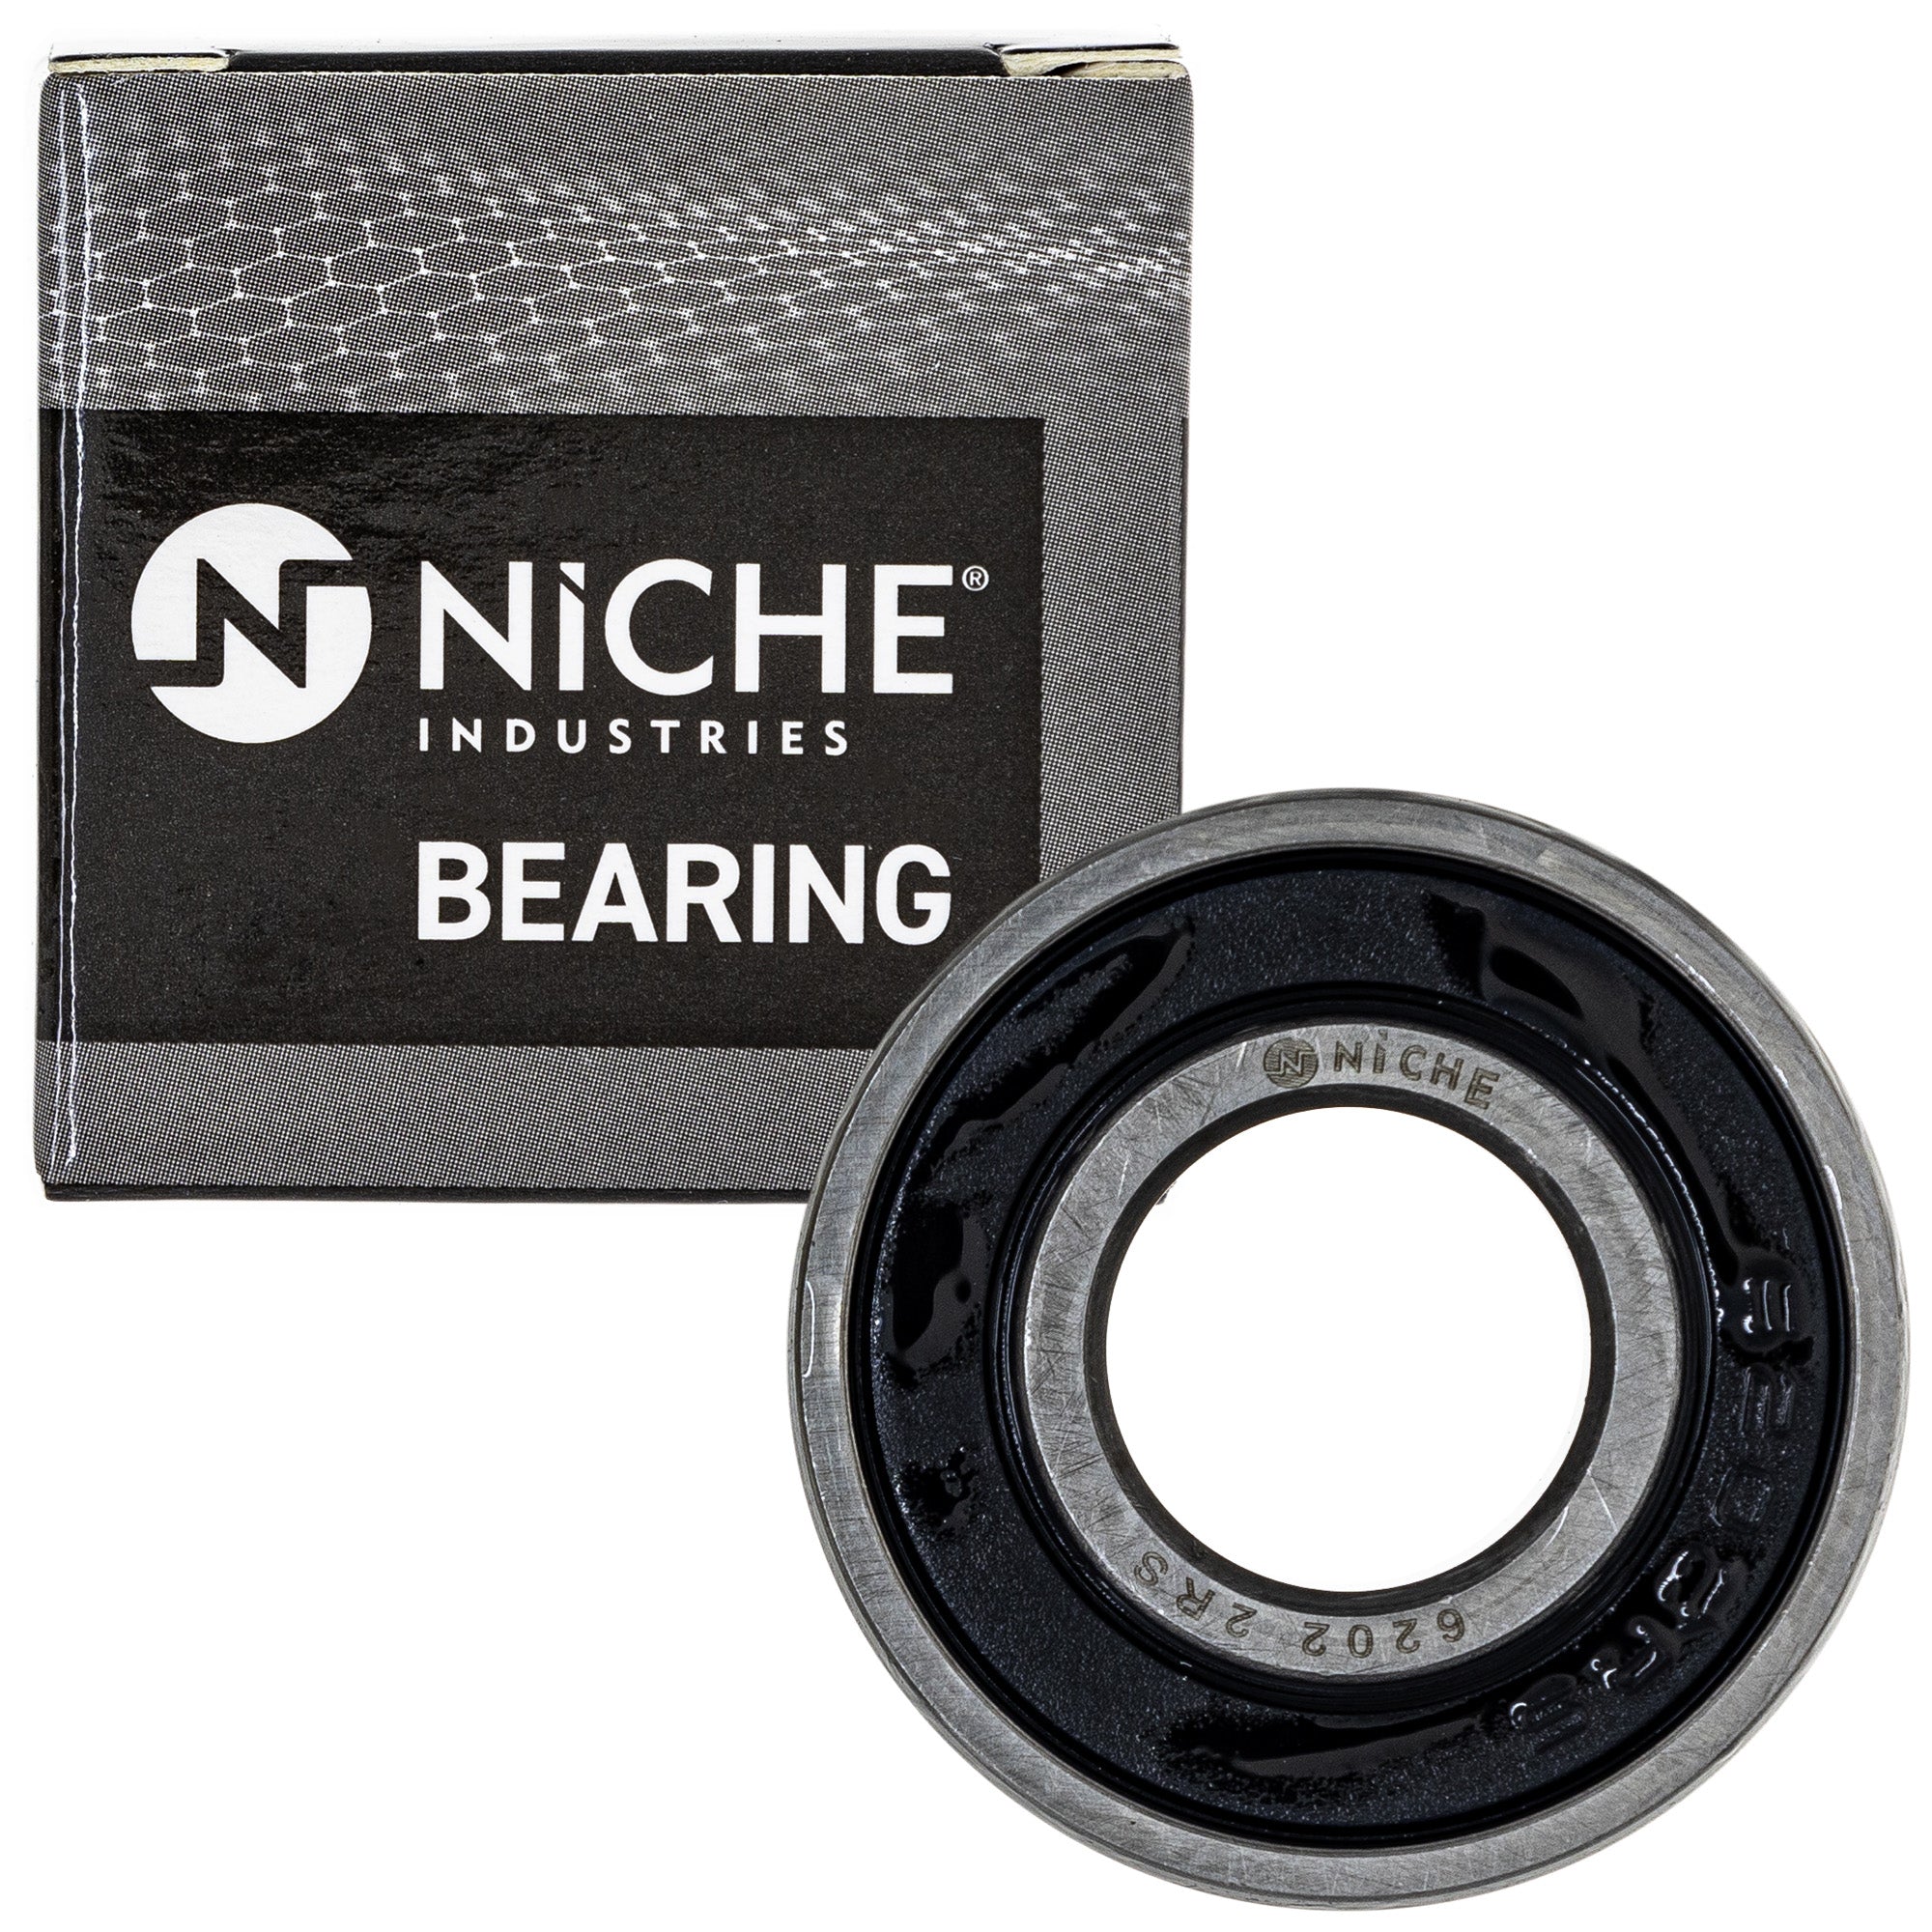 NICHE MK1009121 Wheel Bearing Seal Kit for zOTHER Ref No DR650S